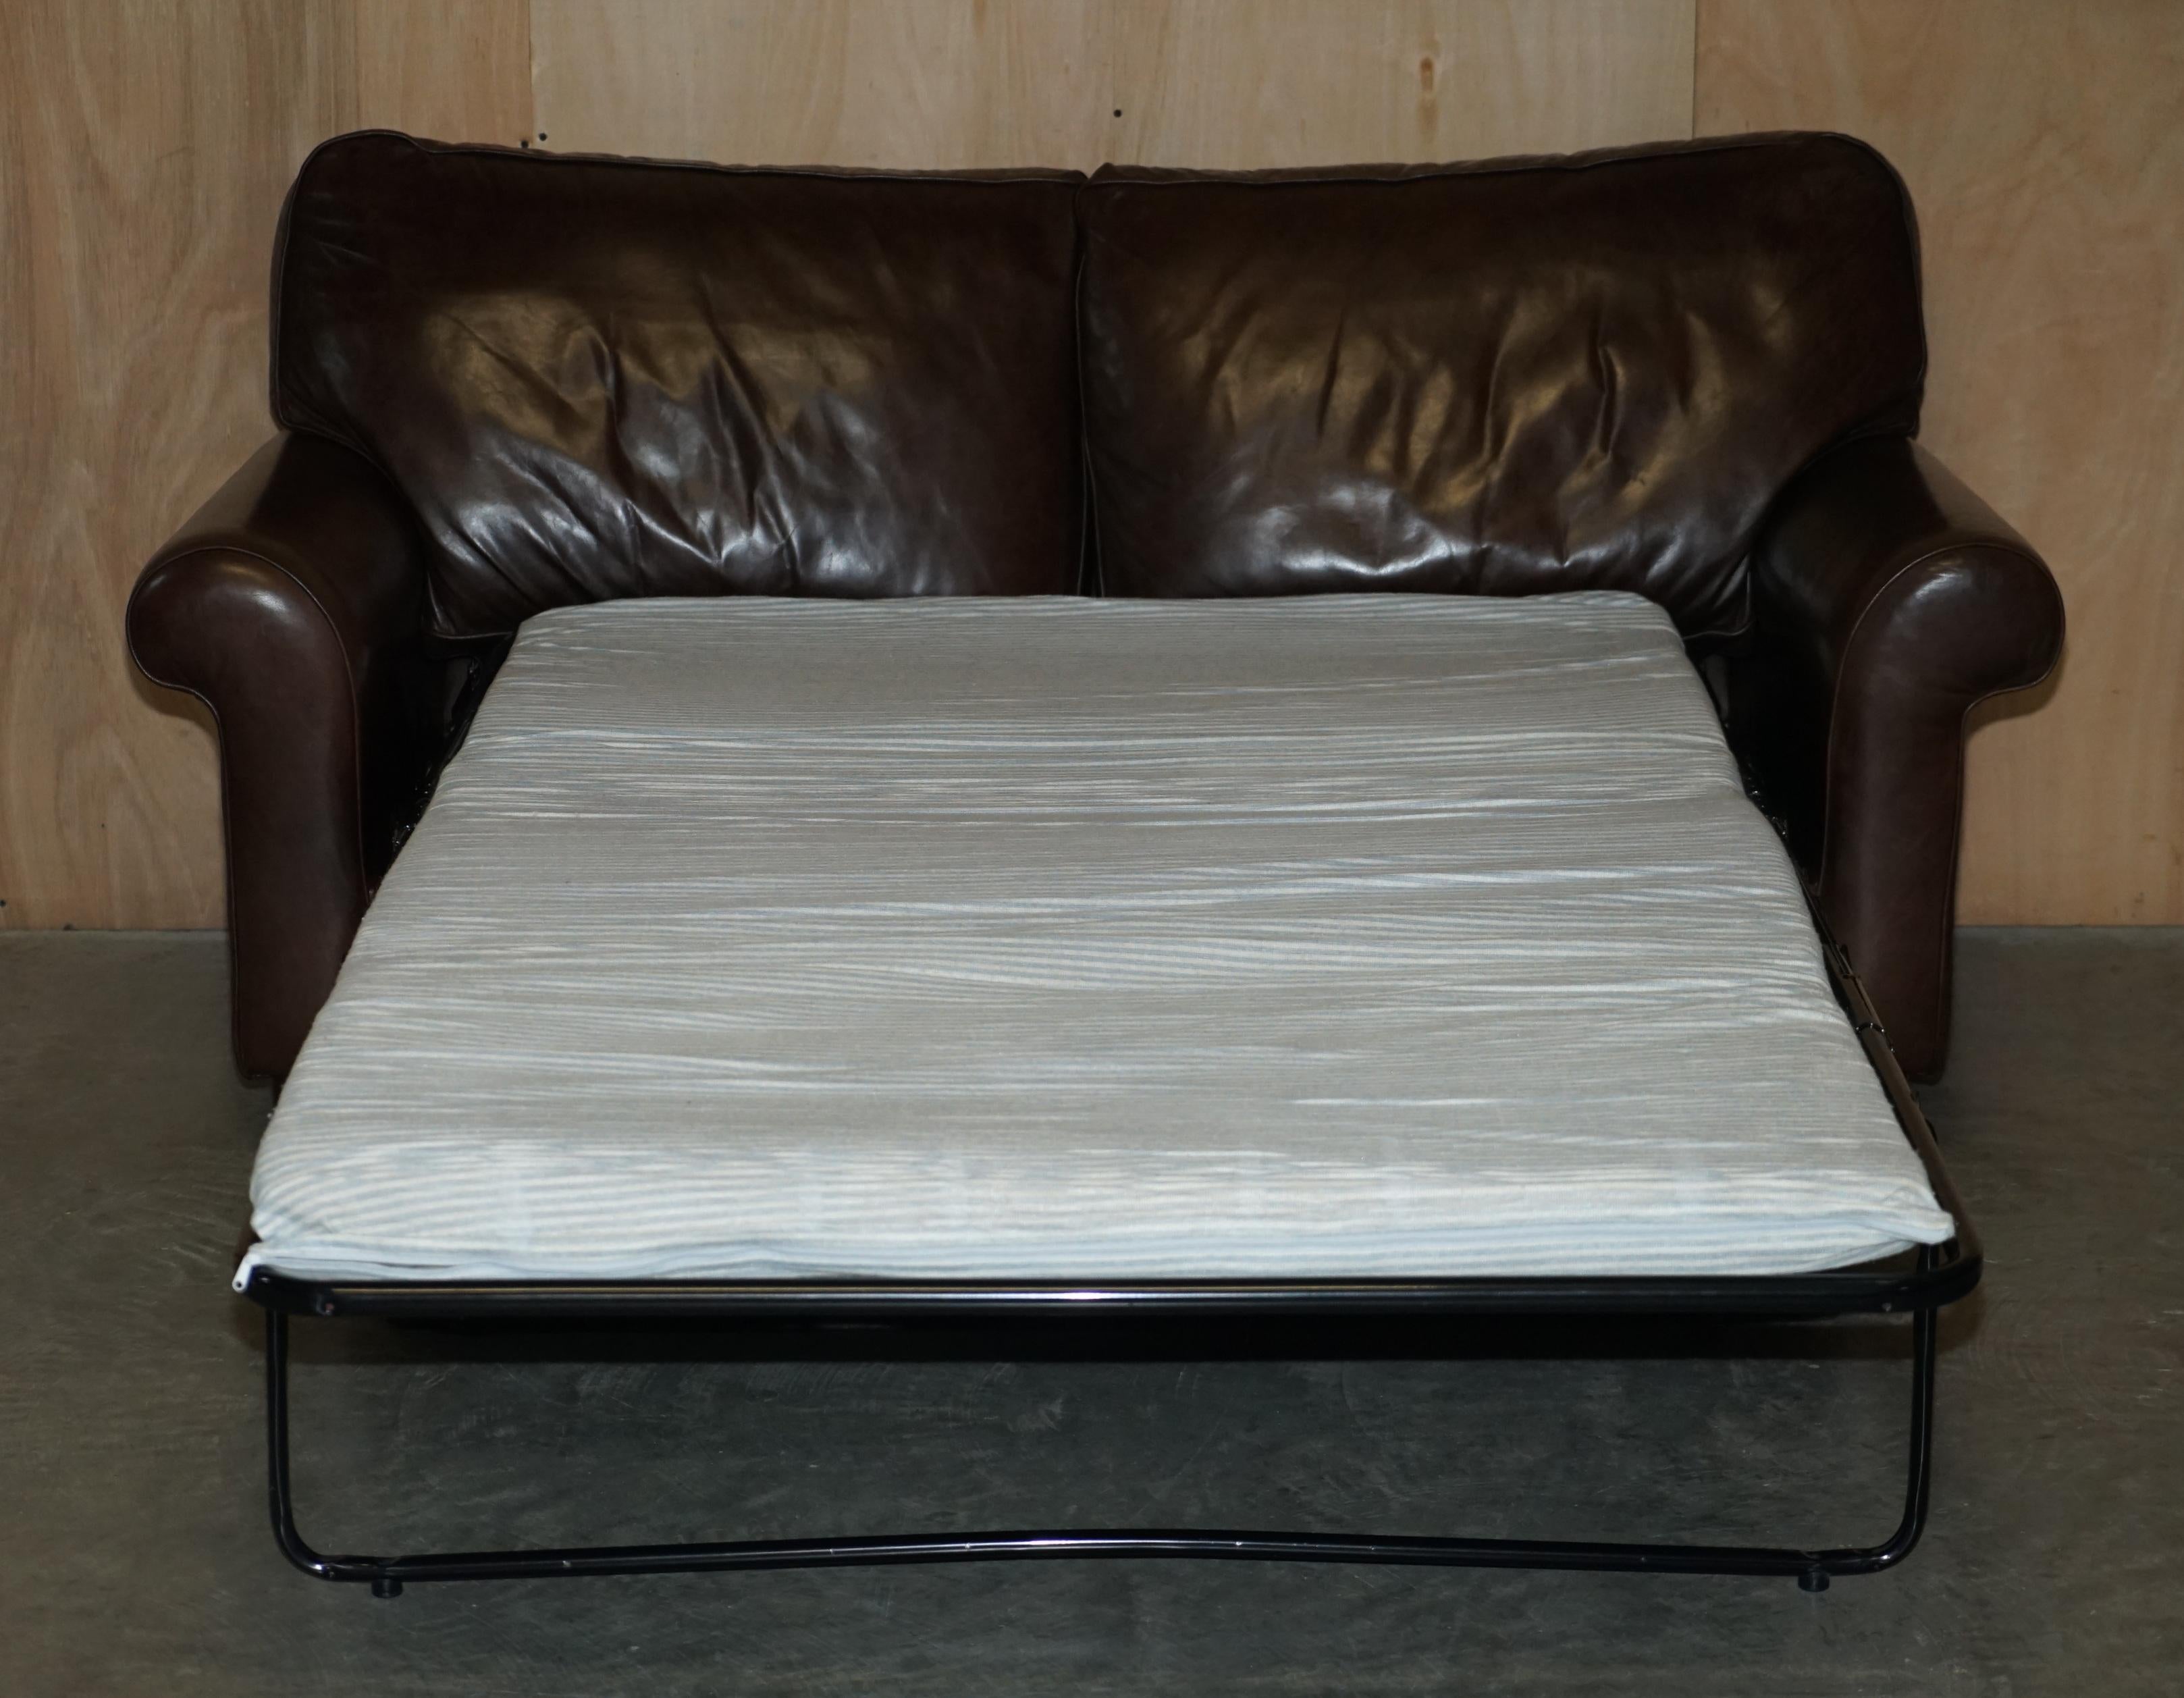 LOVELY HERITAGE BROWN LEATHER LAURA ASHLEY MORTIMER SOFABED IN SEHR GUTEM ZUSTAND im Angebot 10